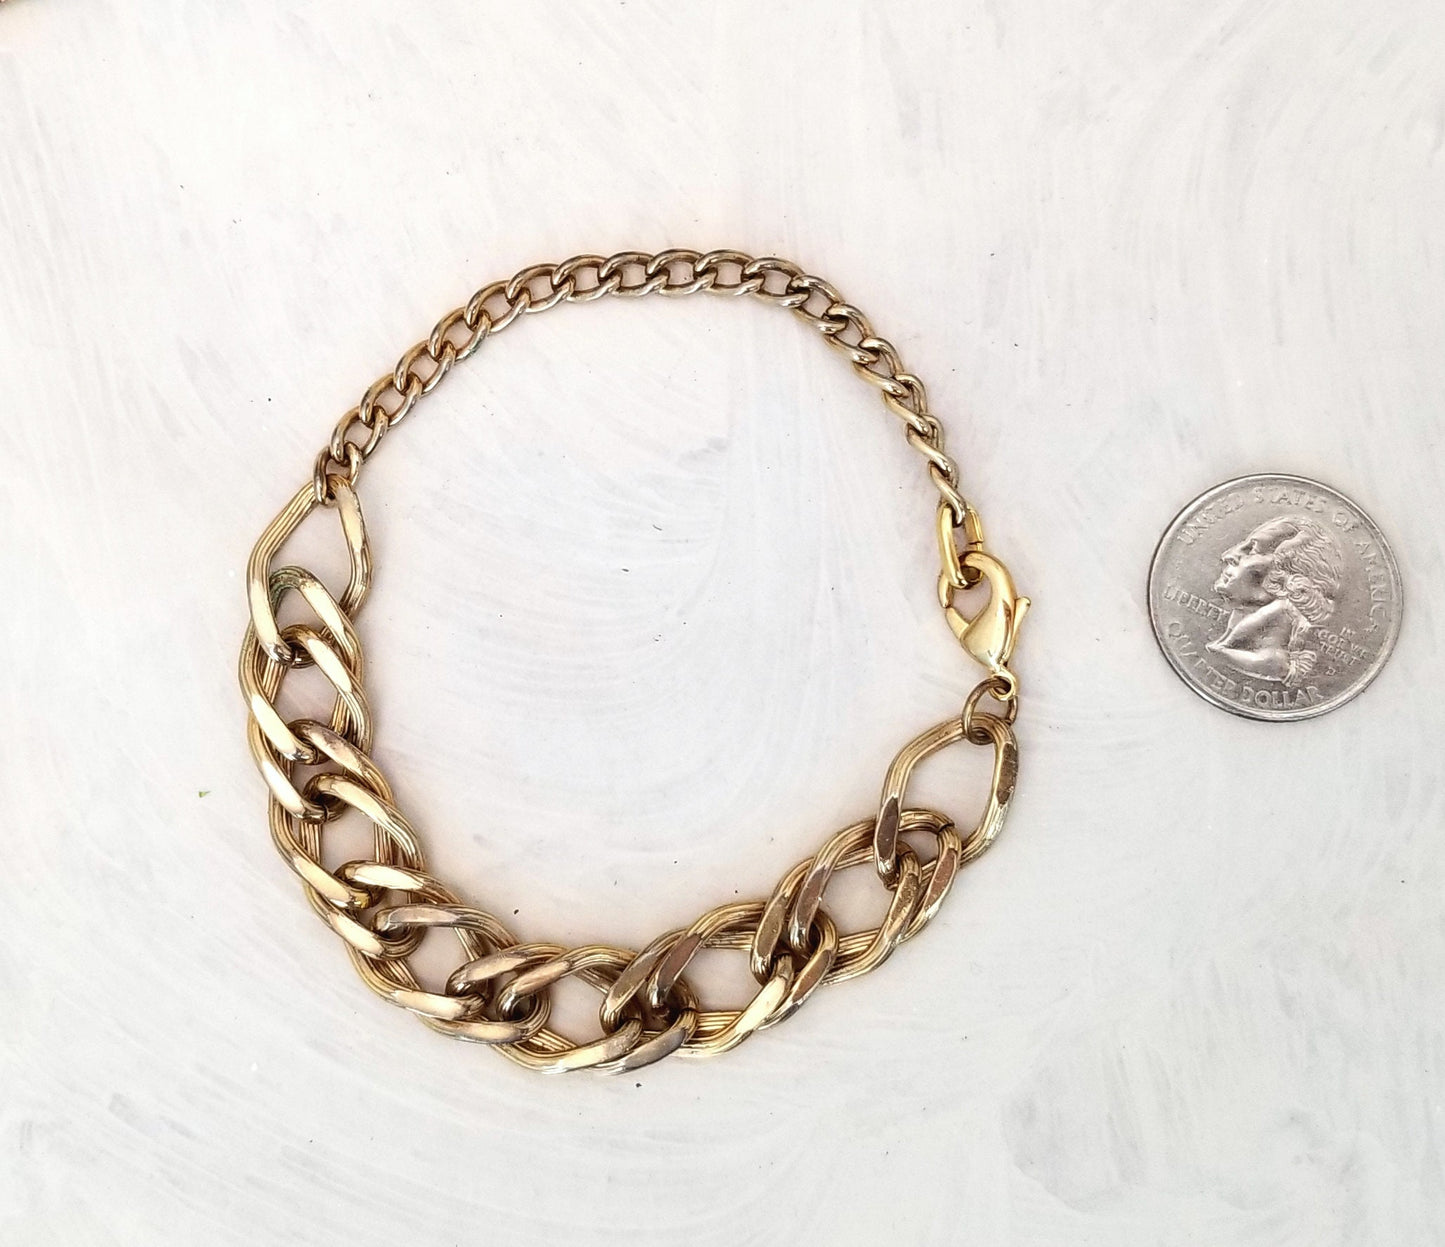 Upcycled Chain Bracelet, Antique Gold Color, Unisex, Lobster Clasp, 8.75 inches, 22.2 cm, Minimalist